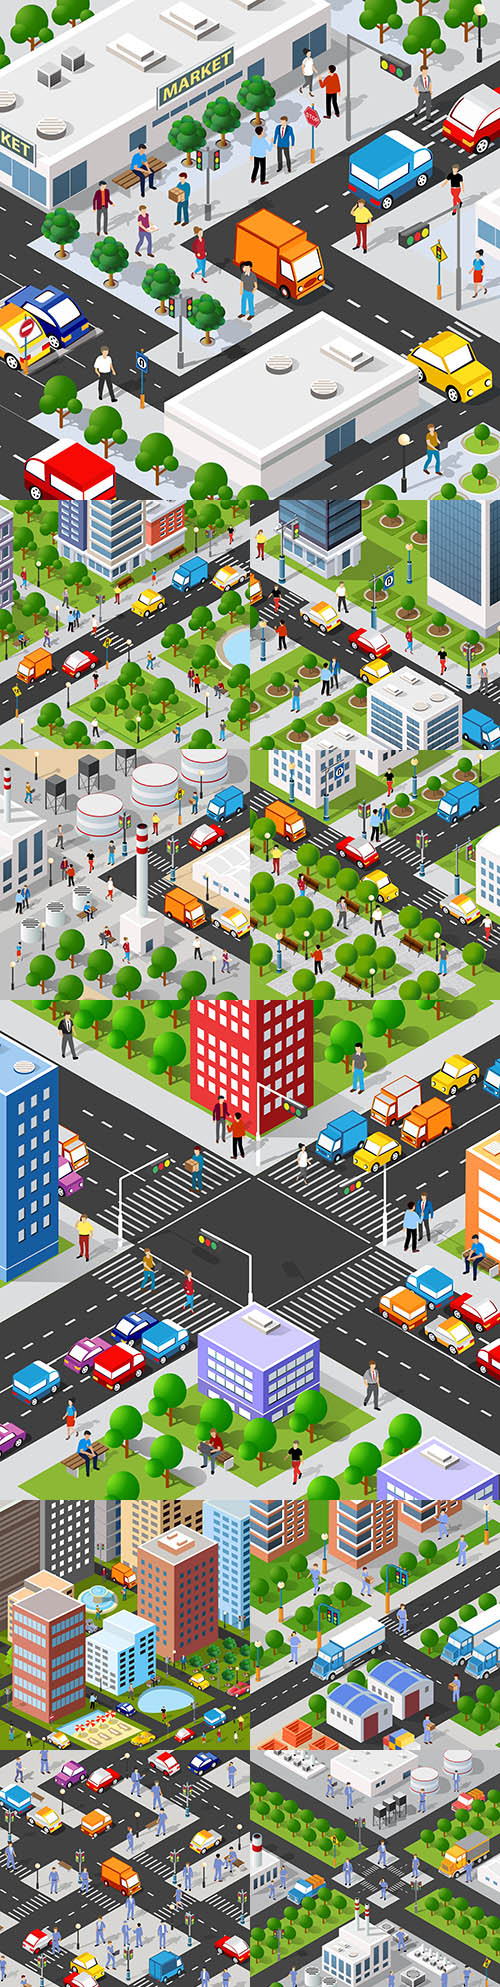 Isometric 3d illustration of the city block with houses and streets
